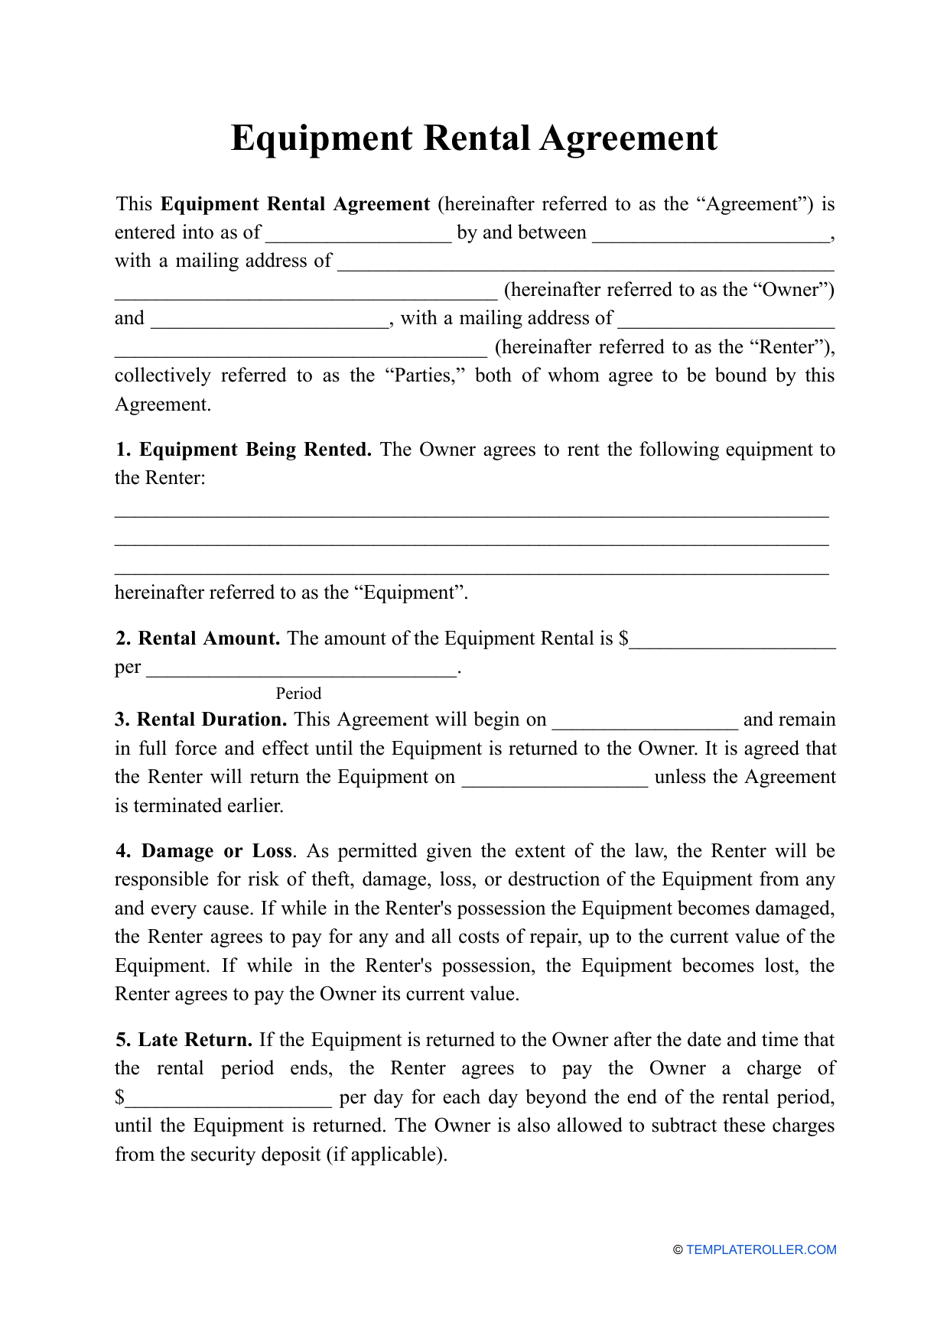 Equipment Rental Agreement Template Download Printable PDF Pertaining To camera equipment rental agreement template